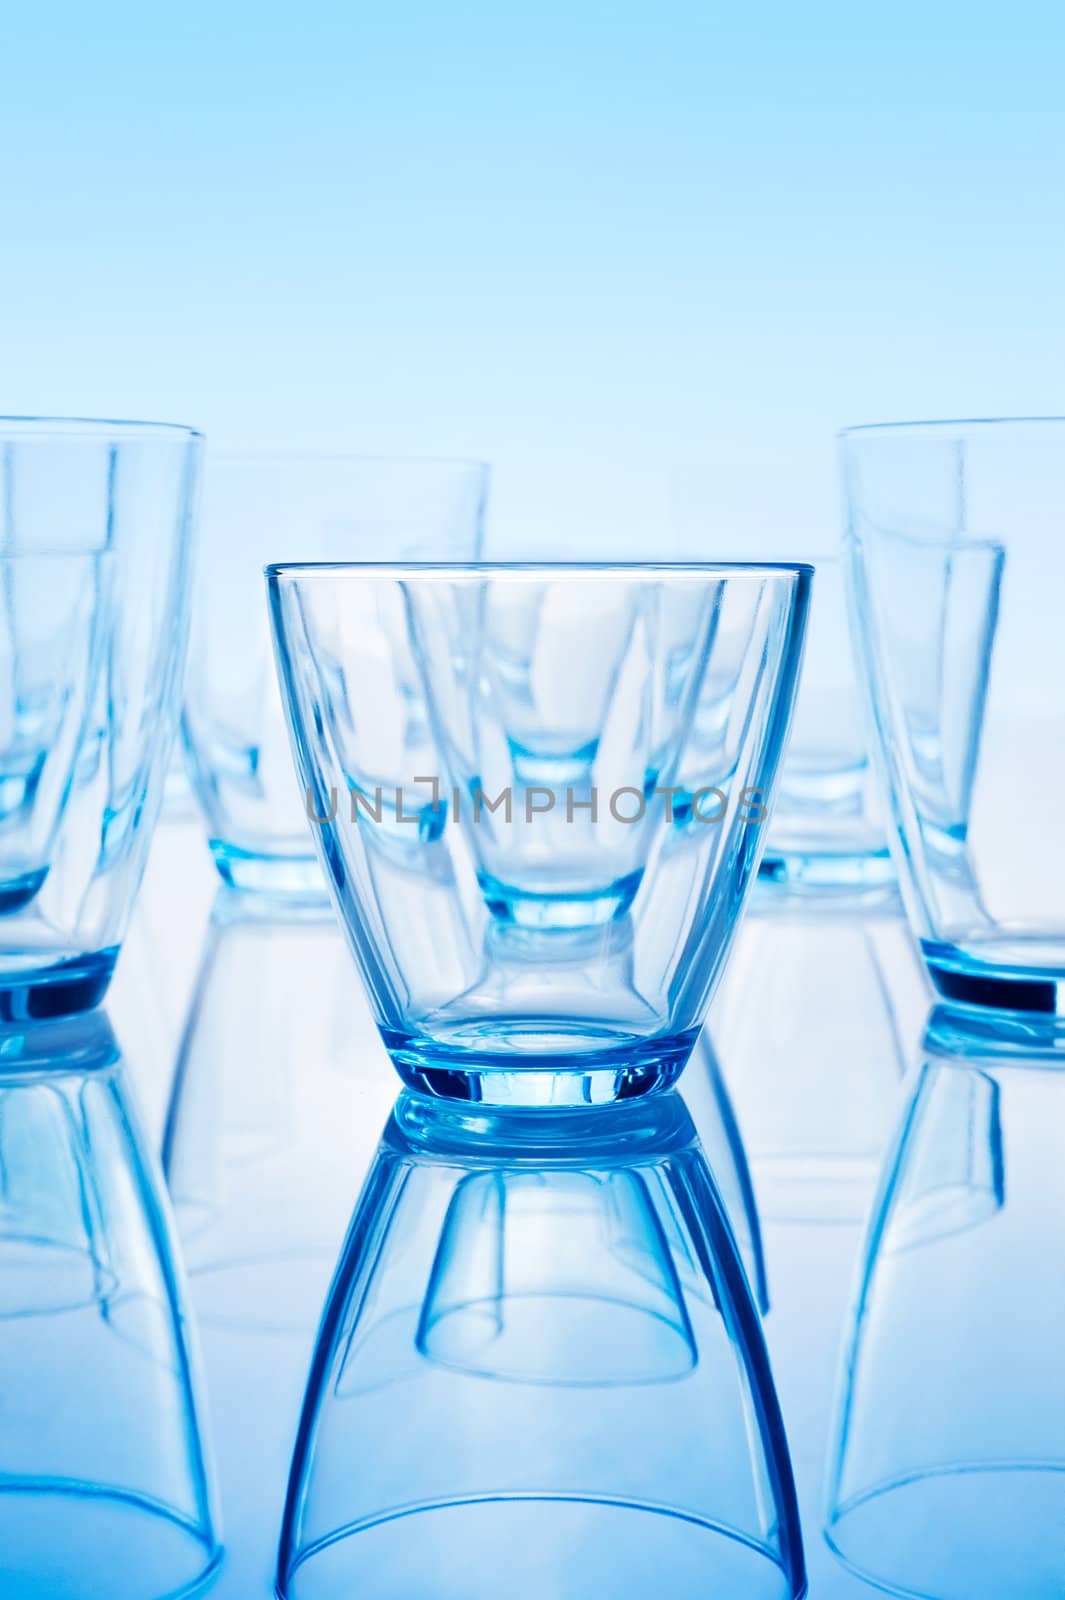 arranged  row of glasses with reflection